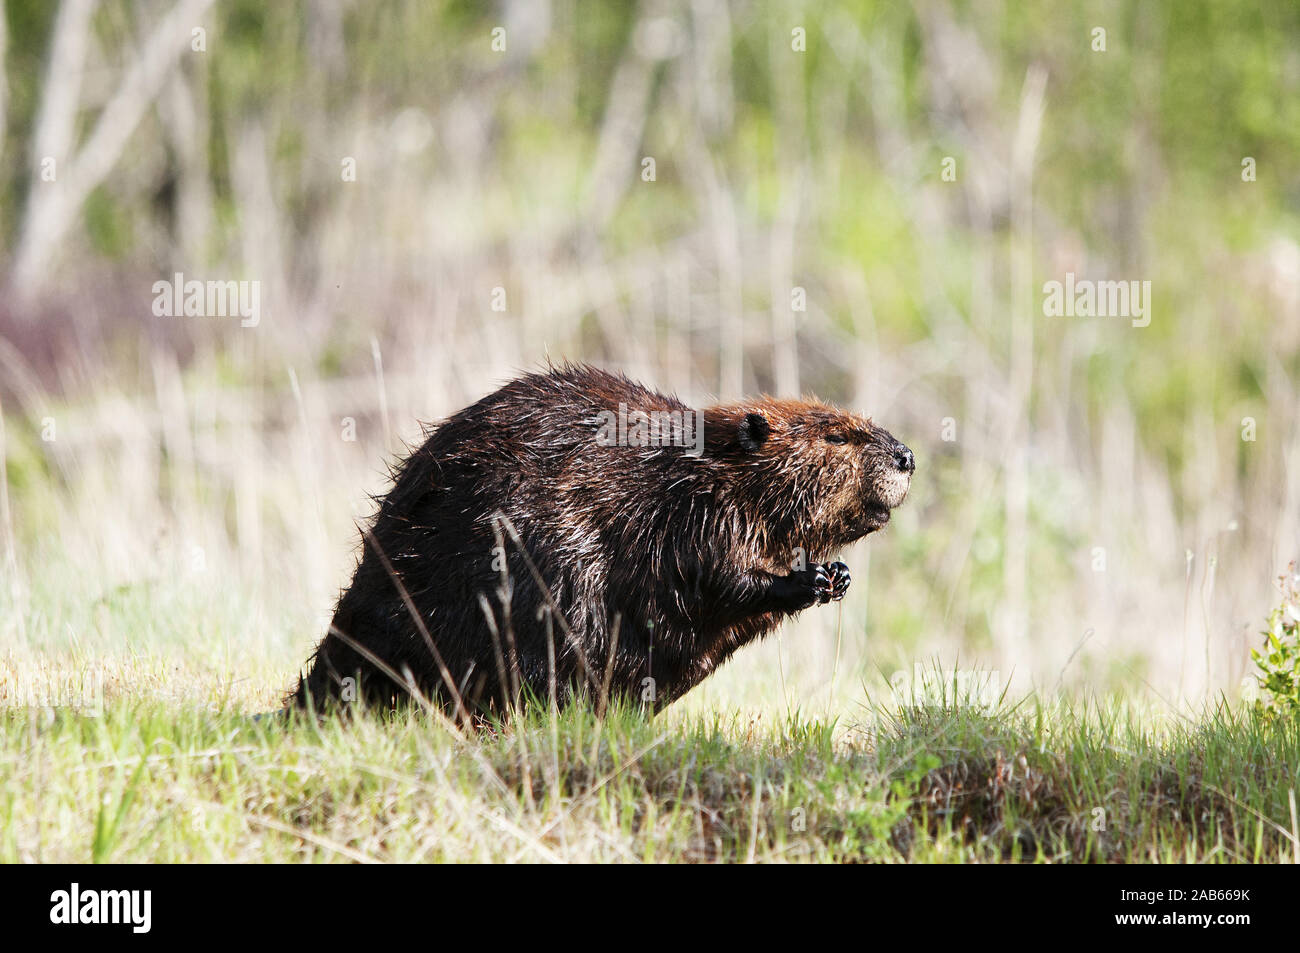 Beaver wild beaver exposing its body, head, eyes, ears, tail with a bokeh background  in its environment and surrounding. Stock Photo